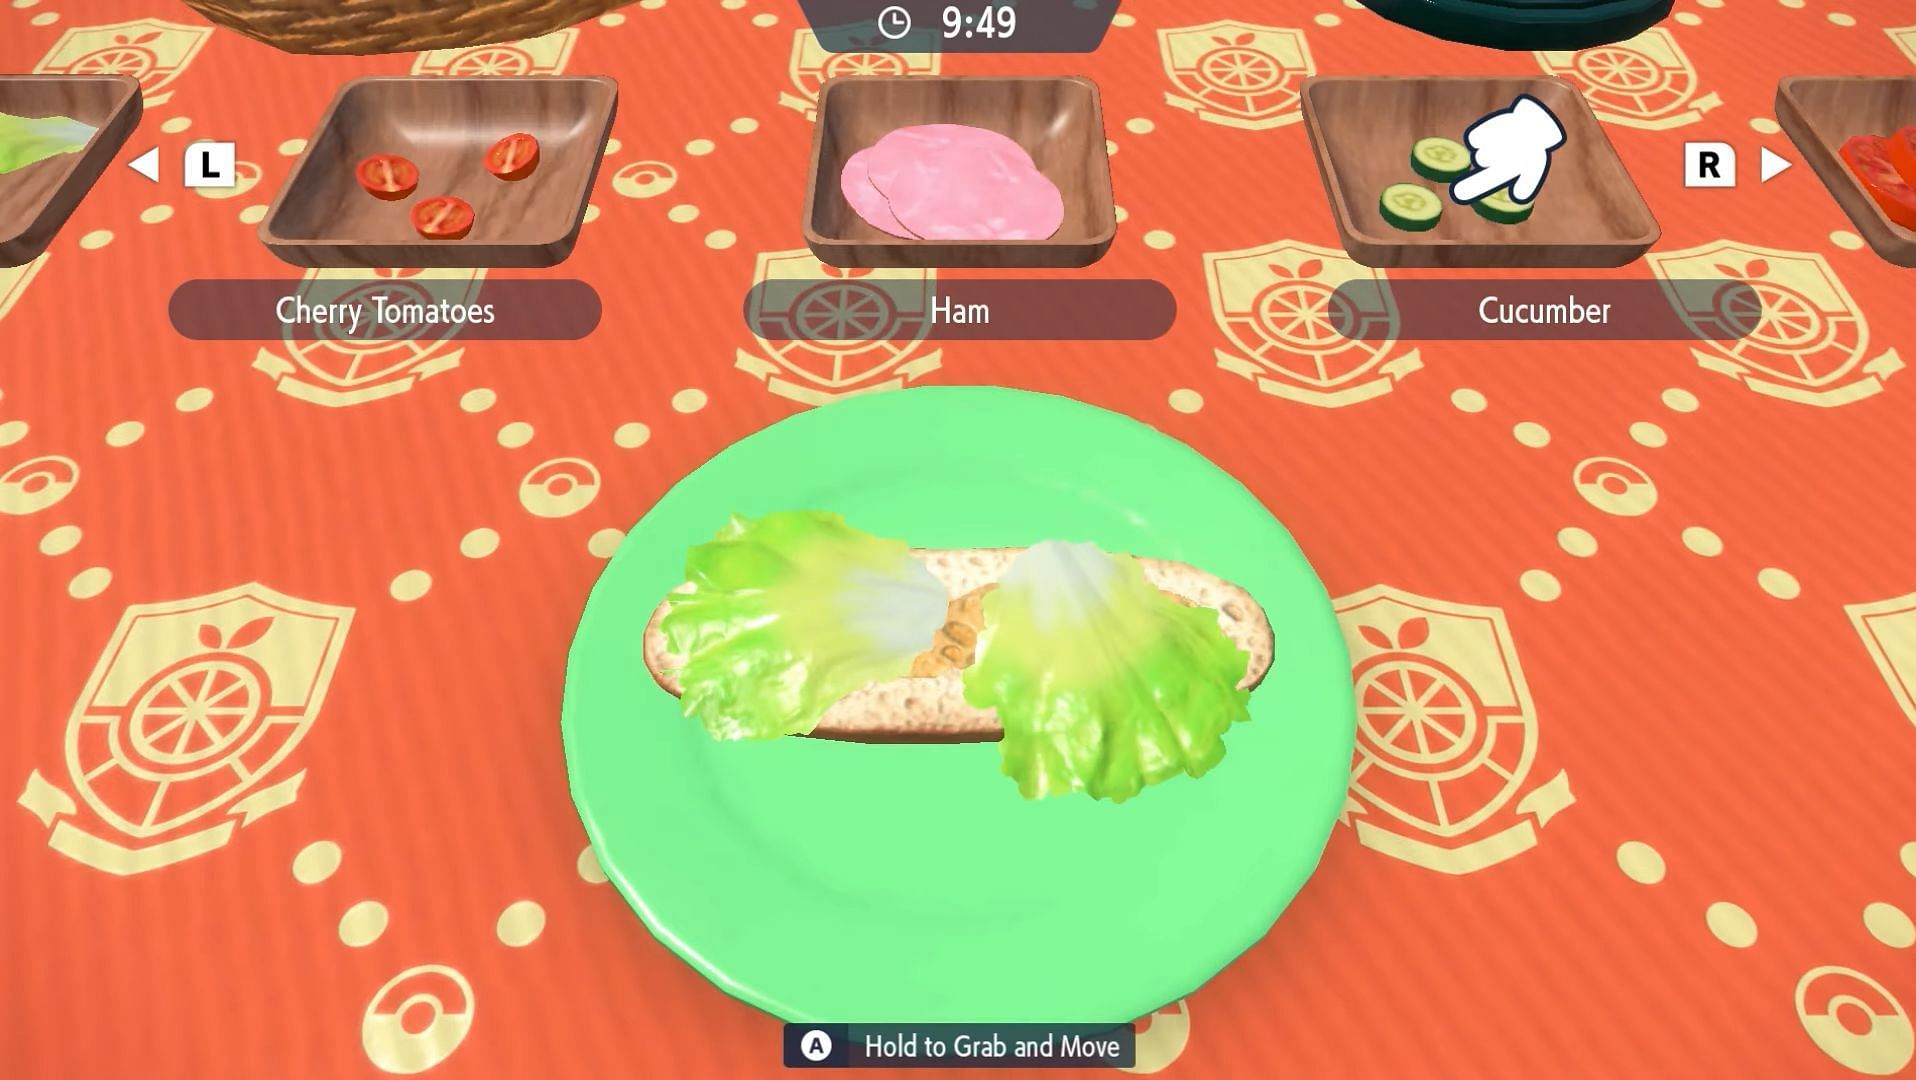 The sandwich-making mini-game as shown in the Pokemon Scarlet and Violet gameplay trailer (Image via The Pokemon Company)